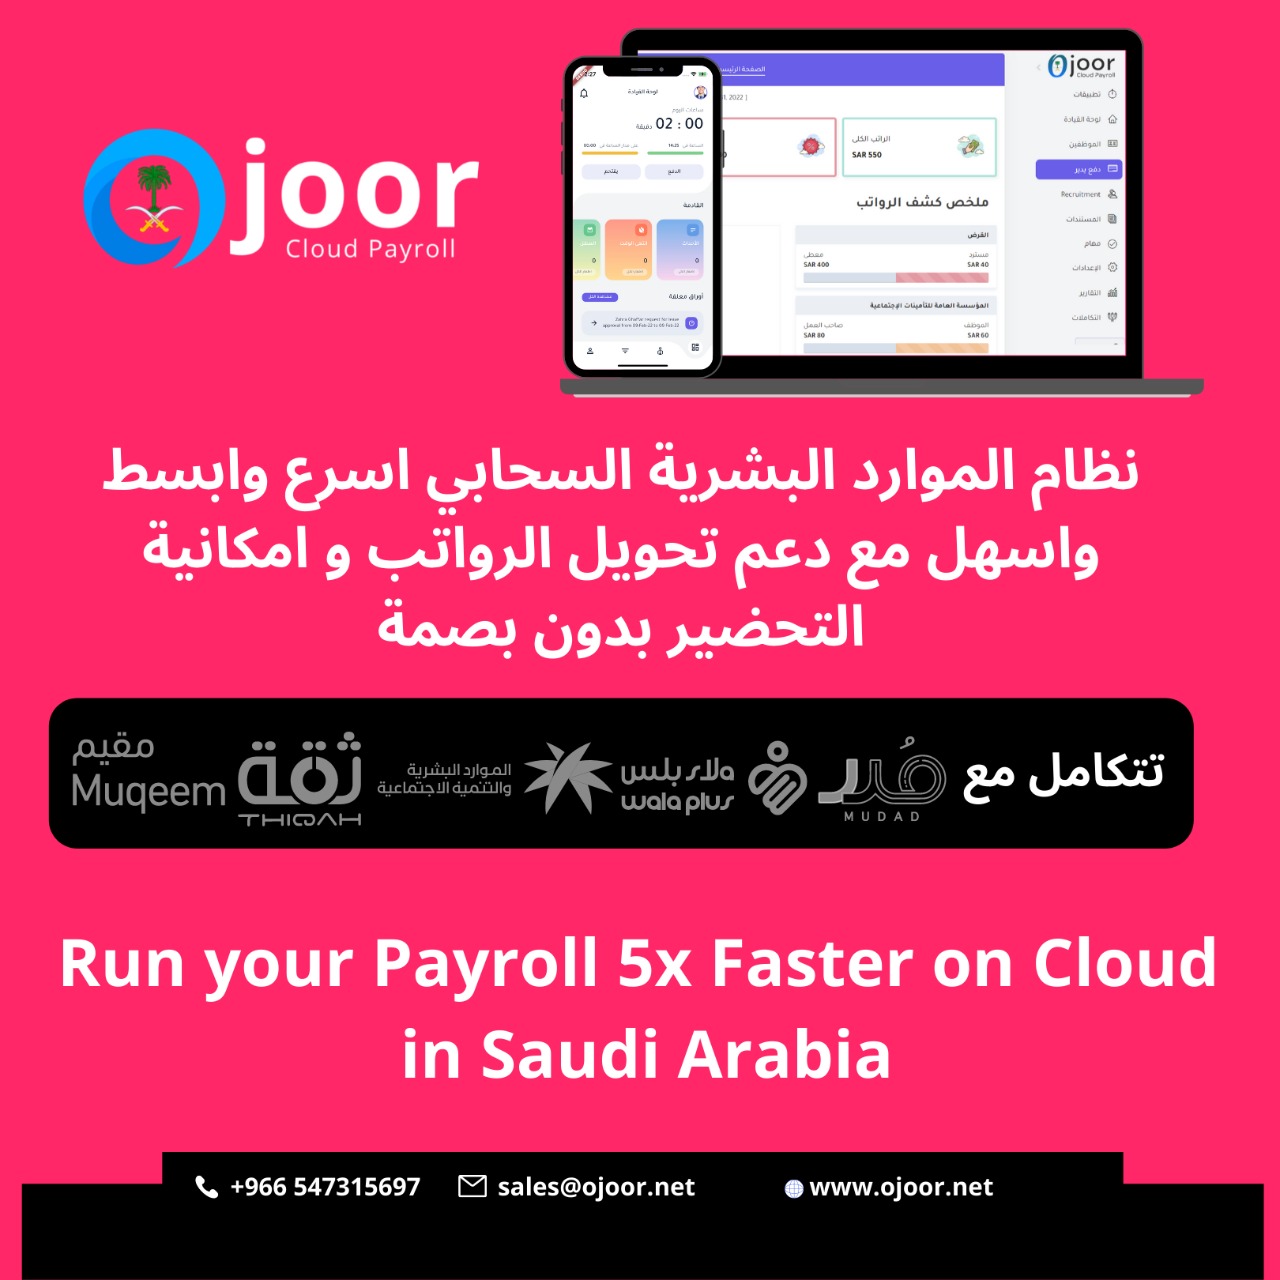 How To Improve Business Productivity With Payroll System in Saudi?